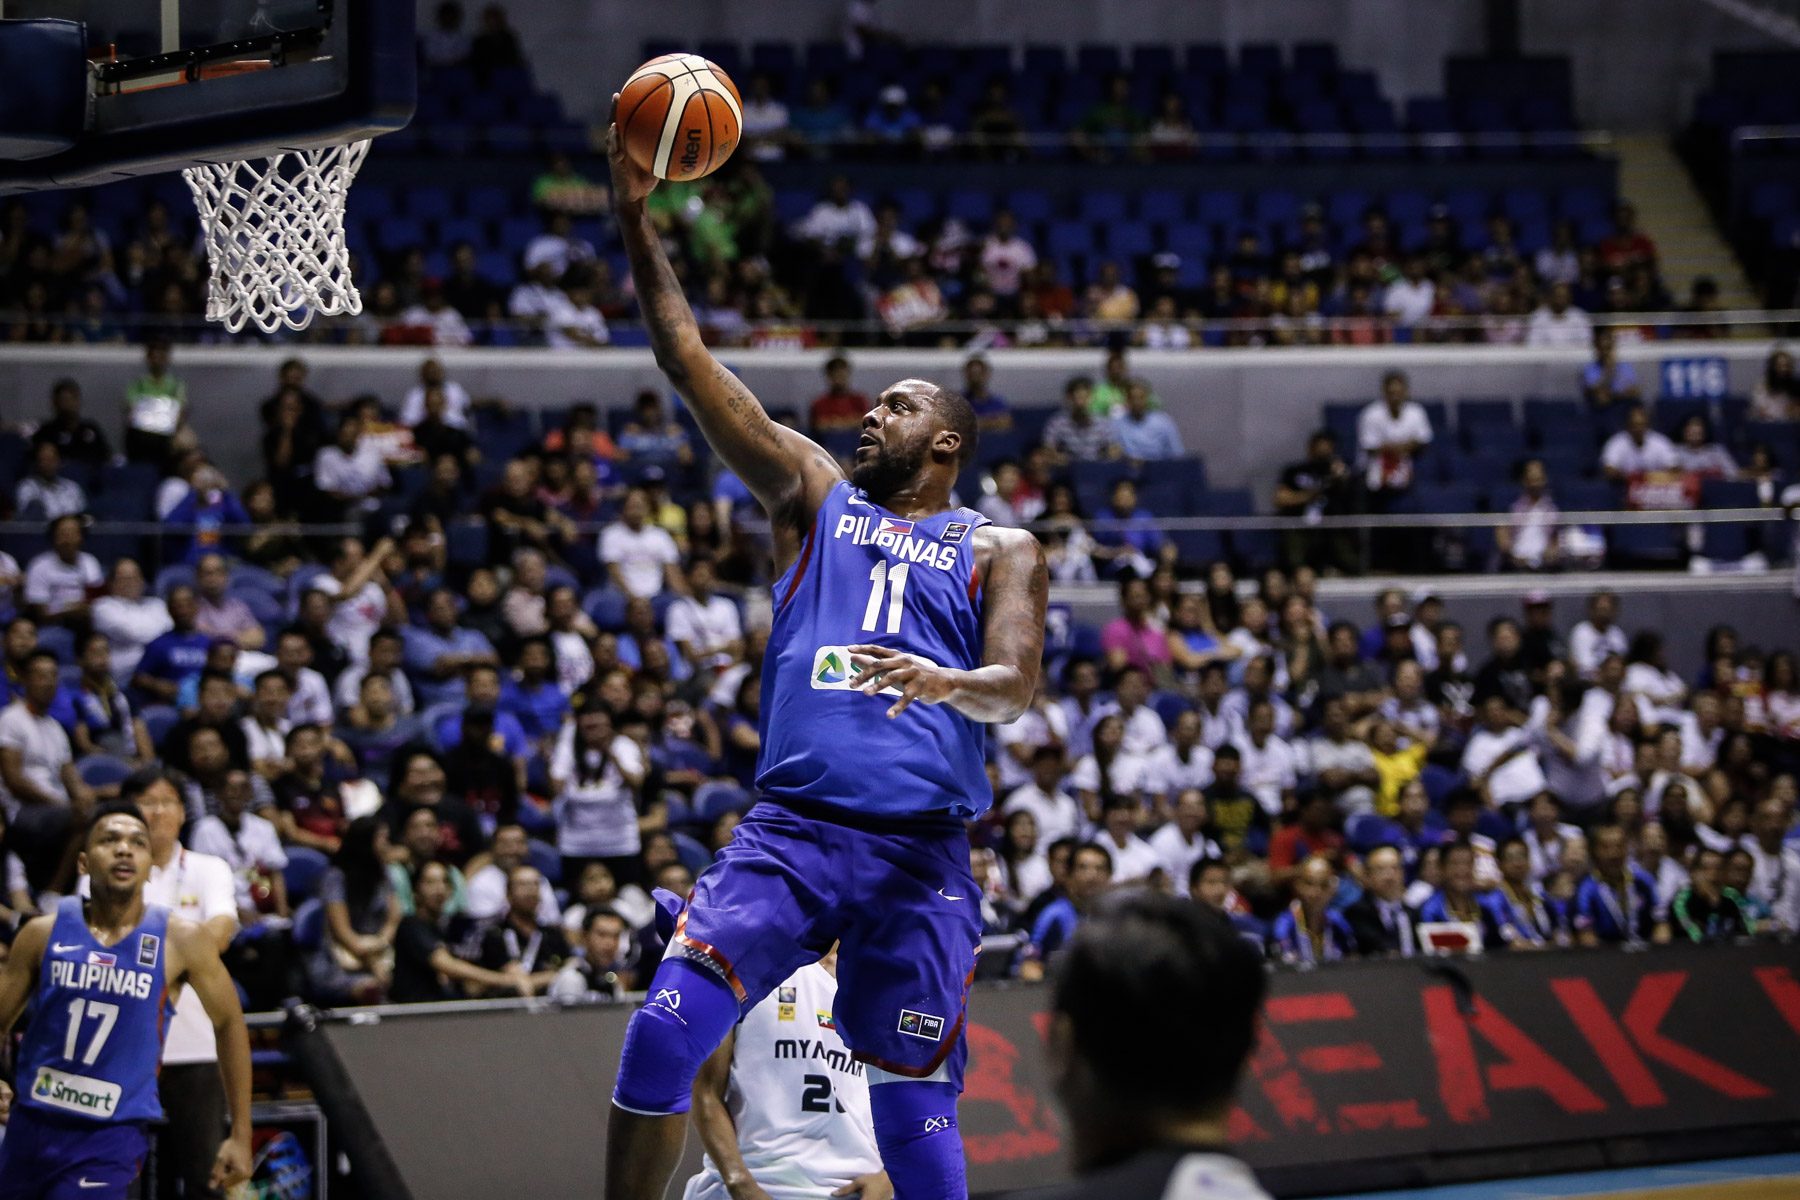 As expected, Gilas Pilipinas thrashes Myanmar in SEABA 2017 opener